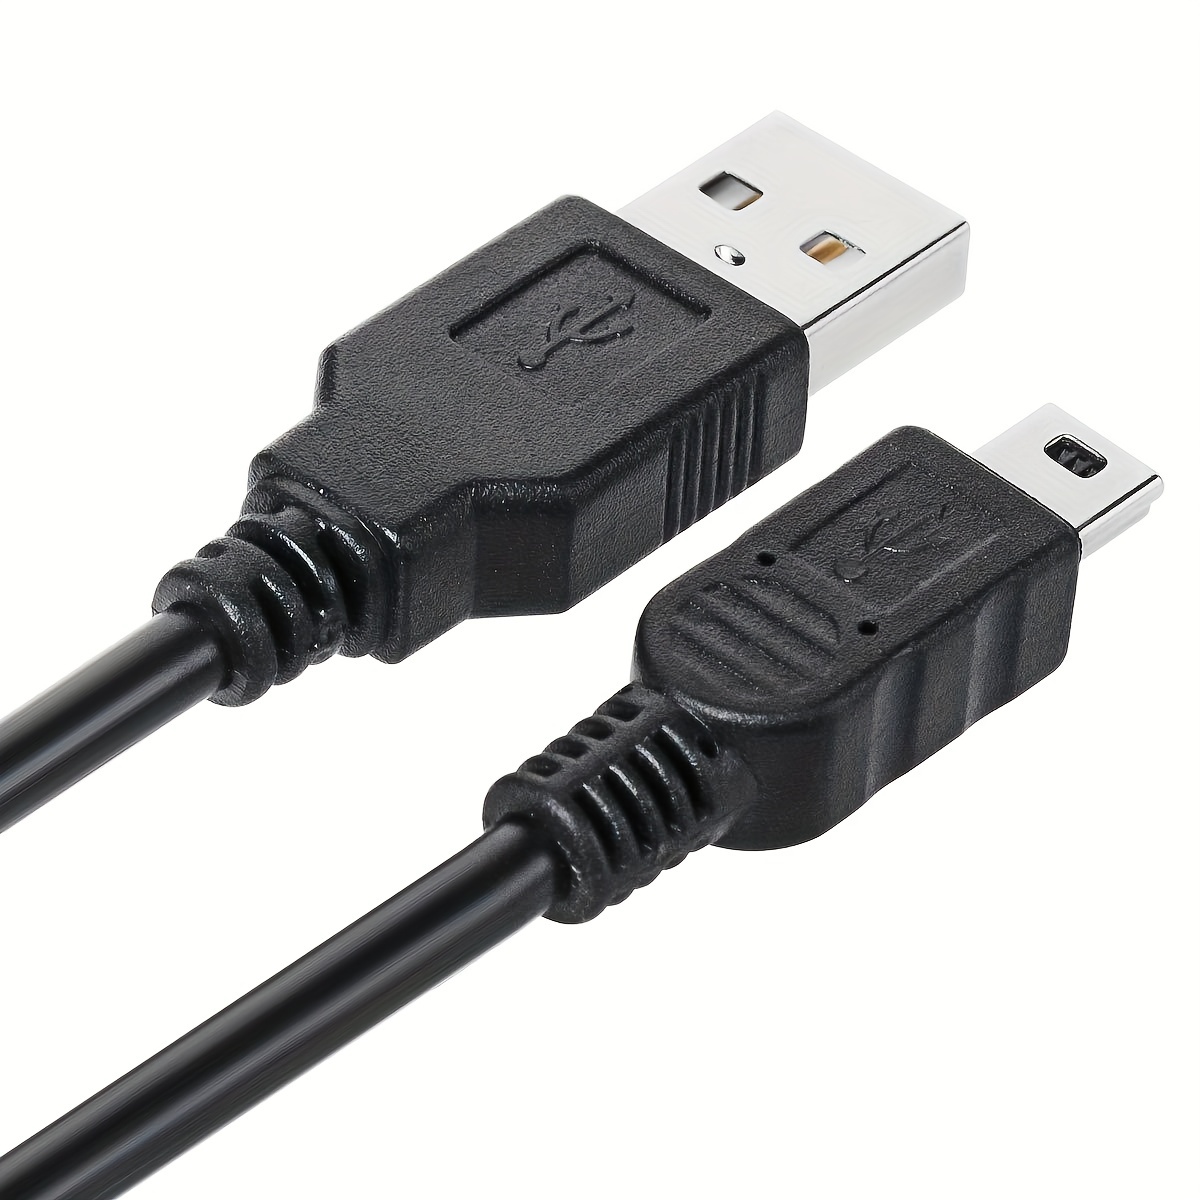 USB Charge Cable for PS3 Controller, Black